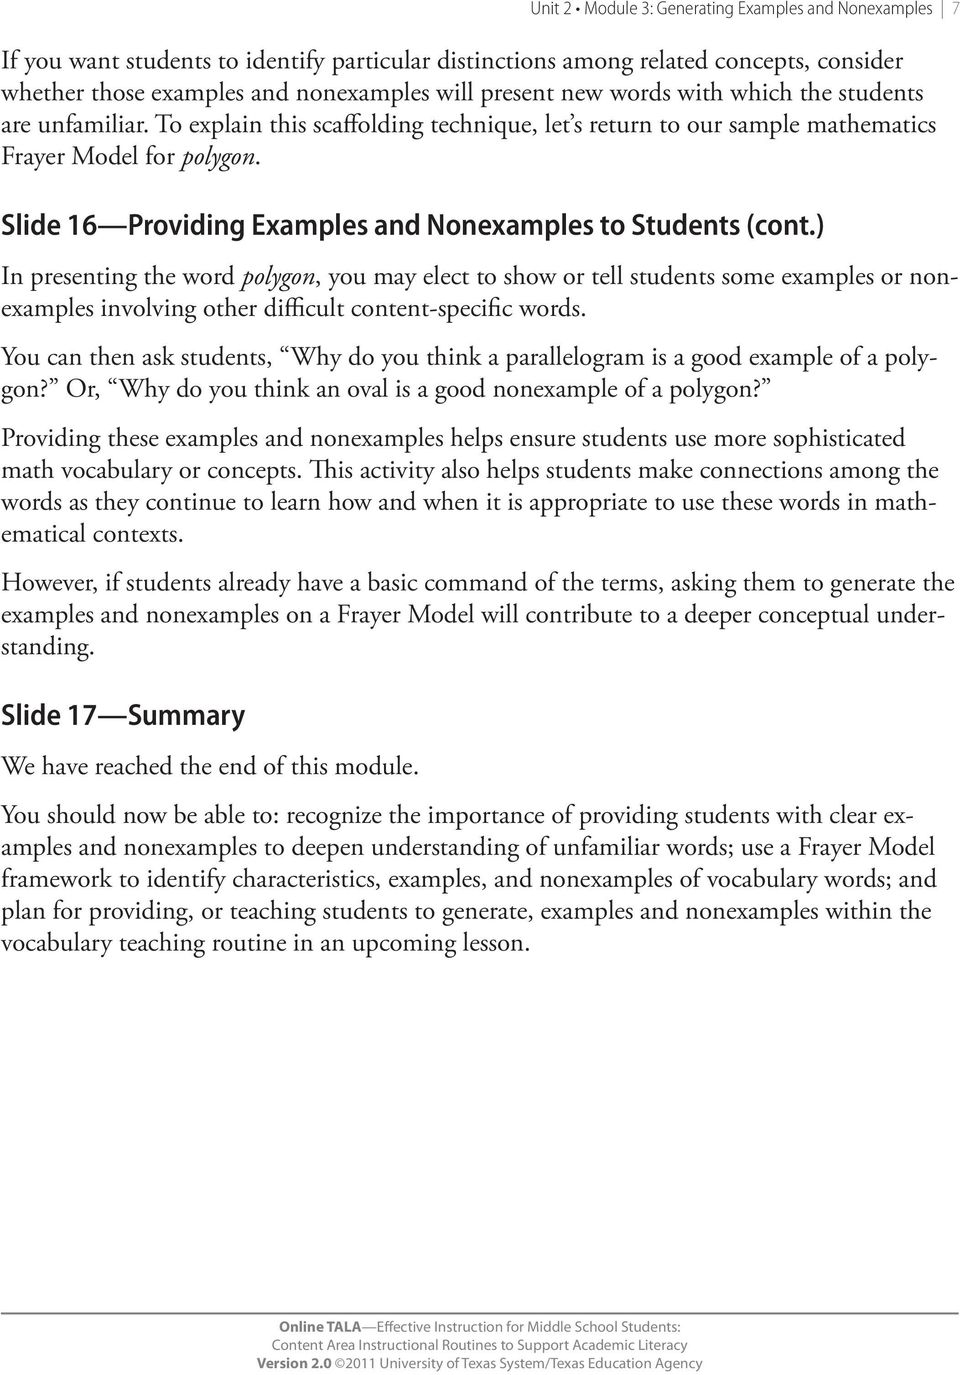 Slide 16 Providing Examples and Nonexamples to Students (cont.